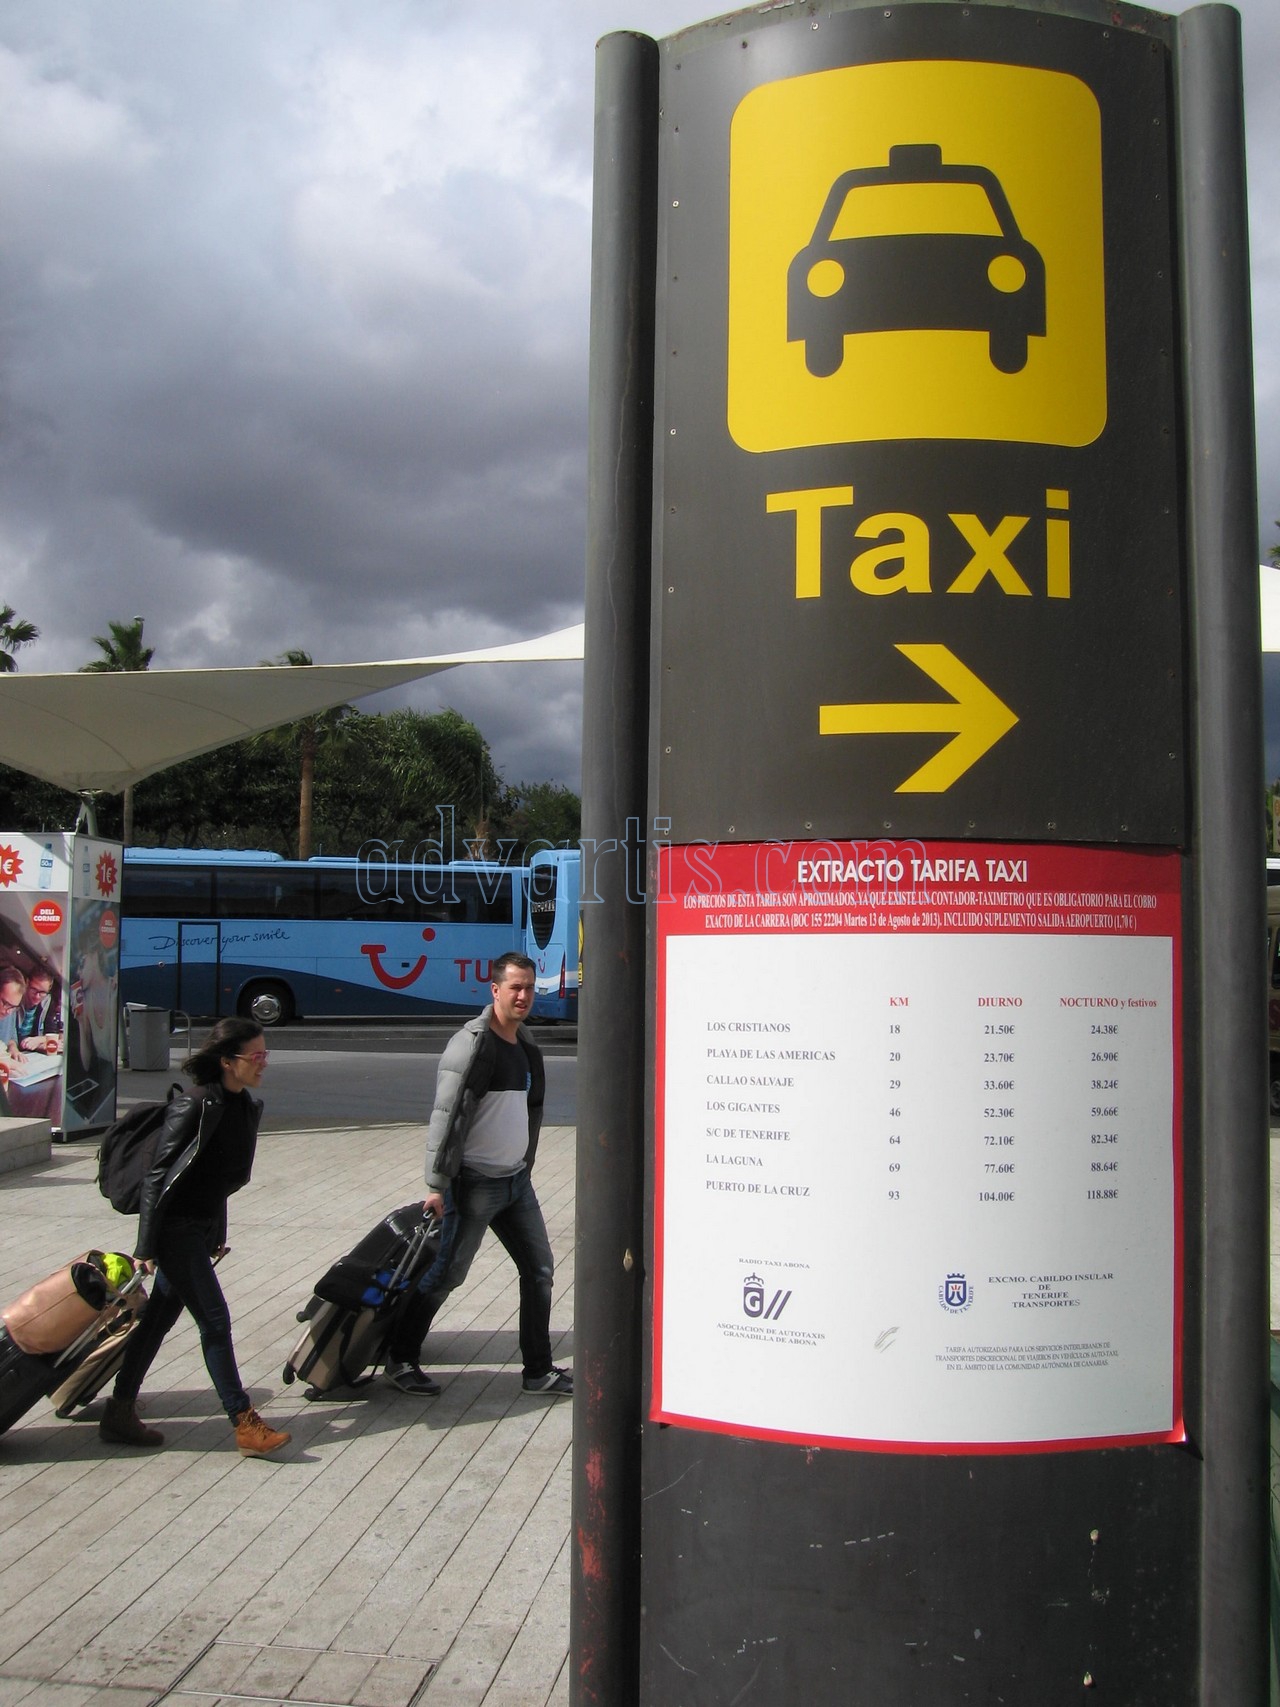 Tenerife south airport taxi rates